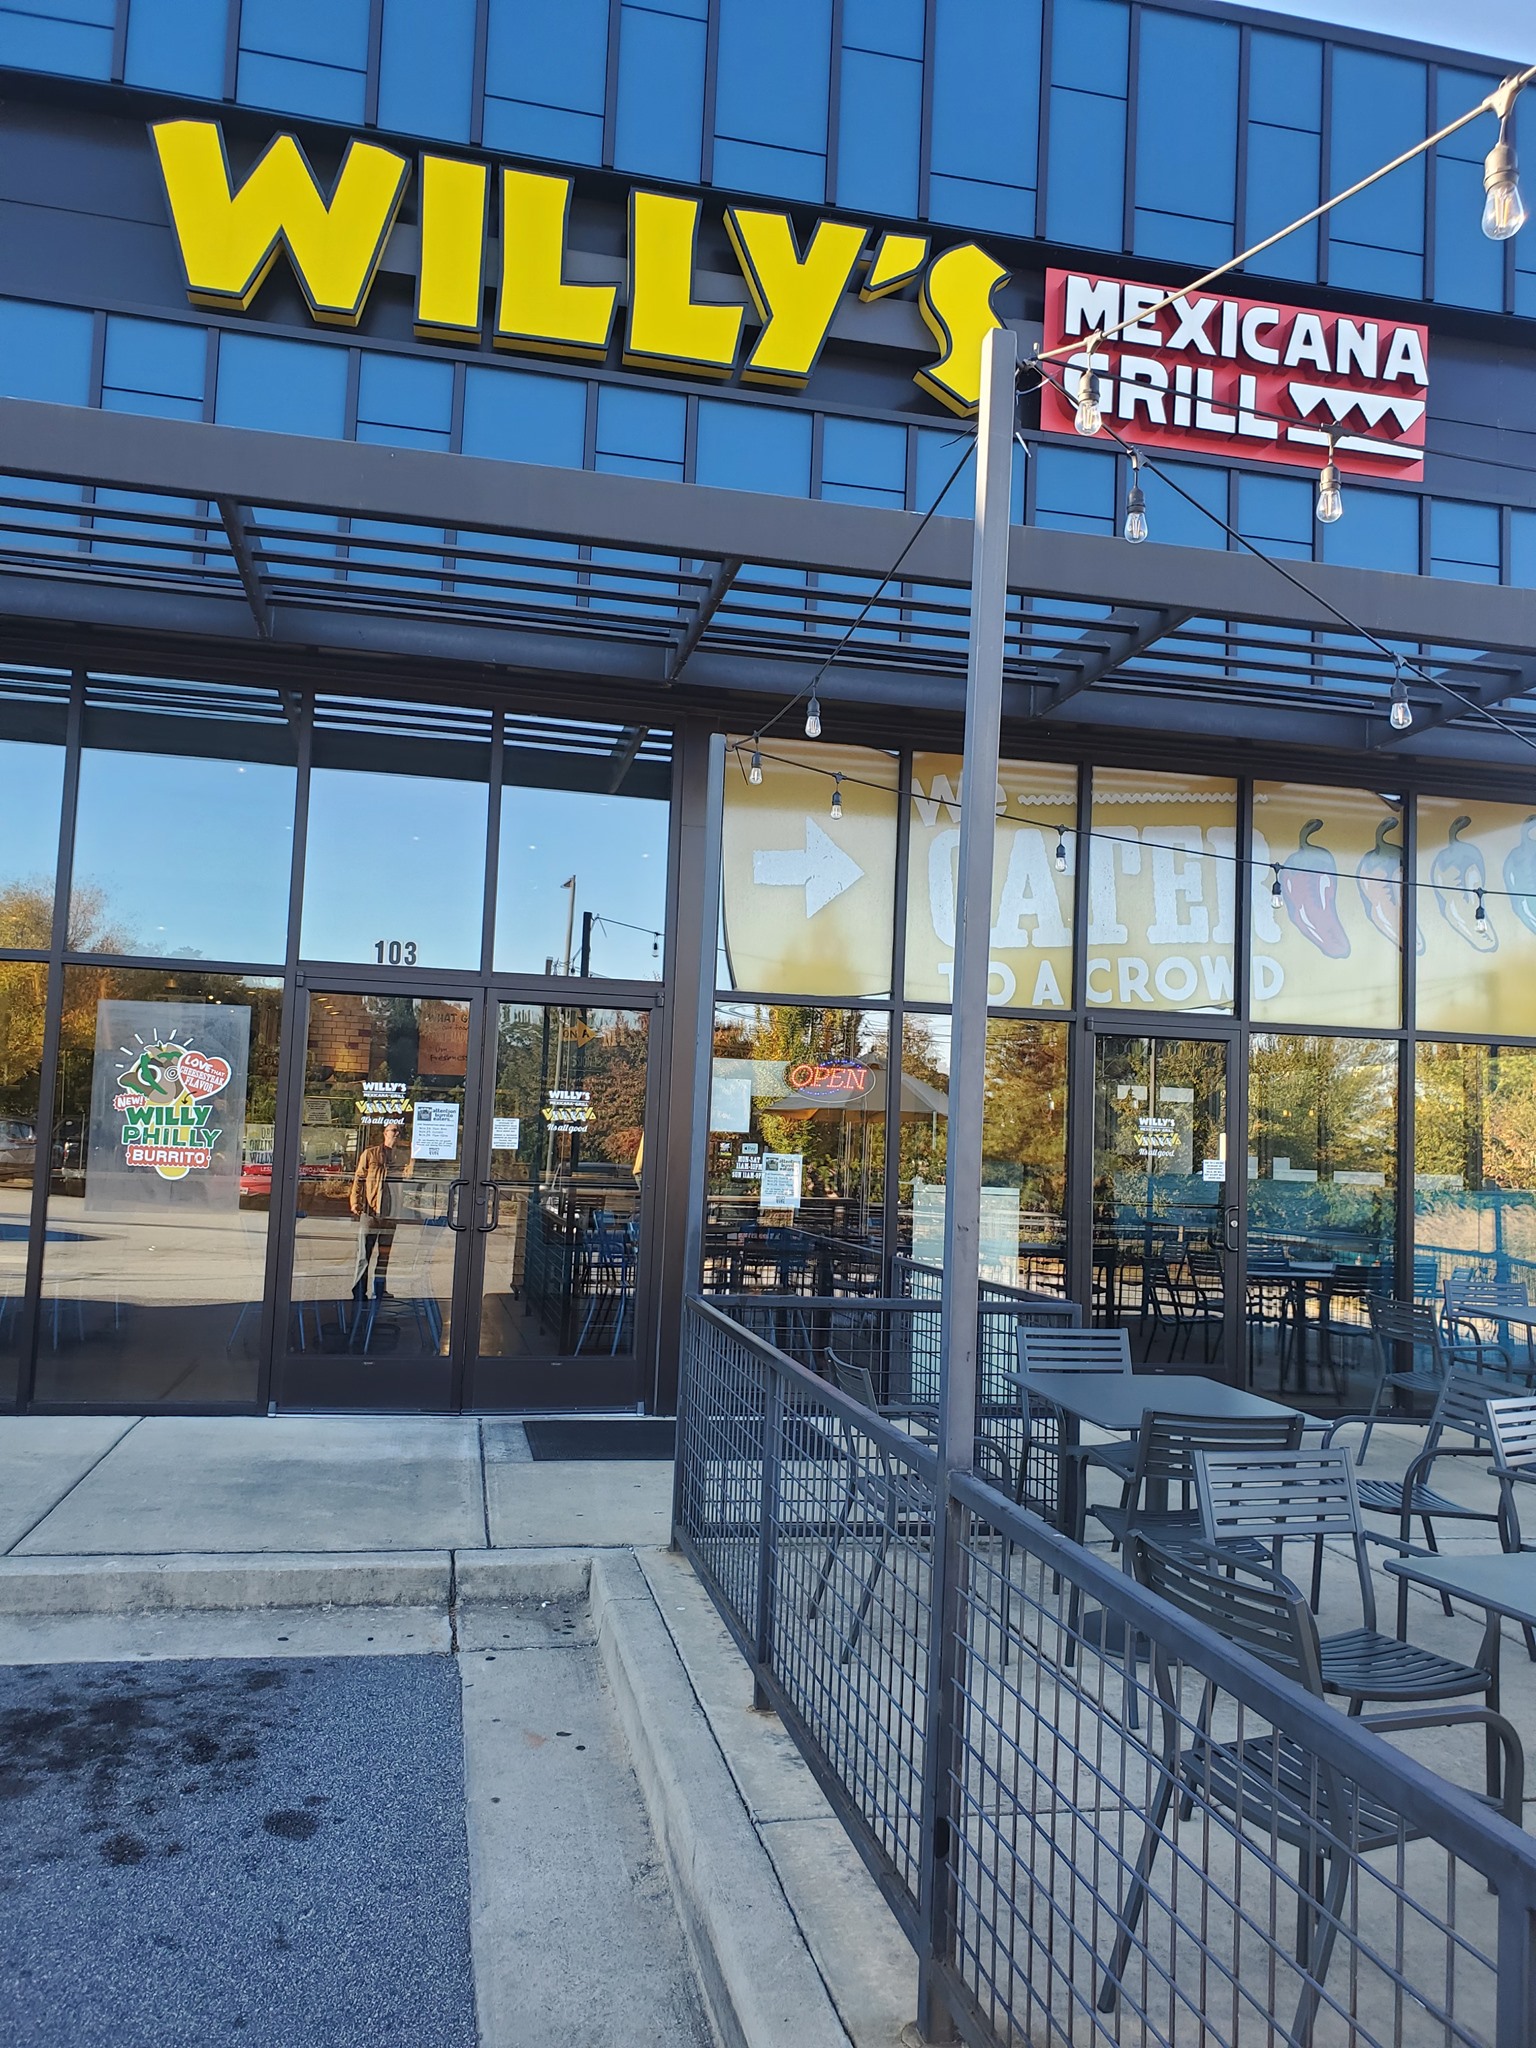 WILLY’S MEXICANA GRILL